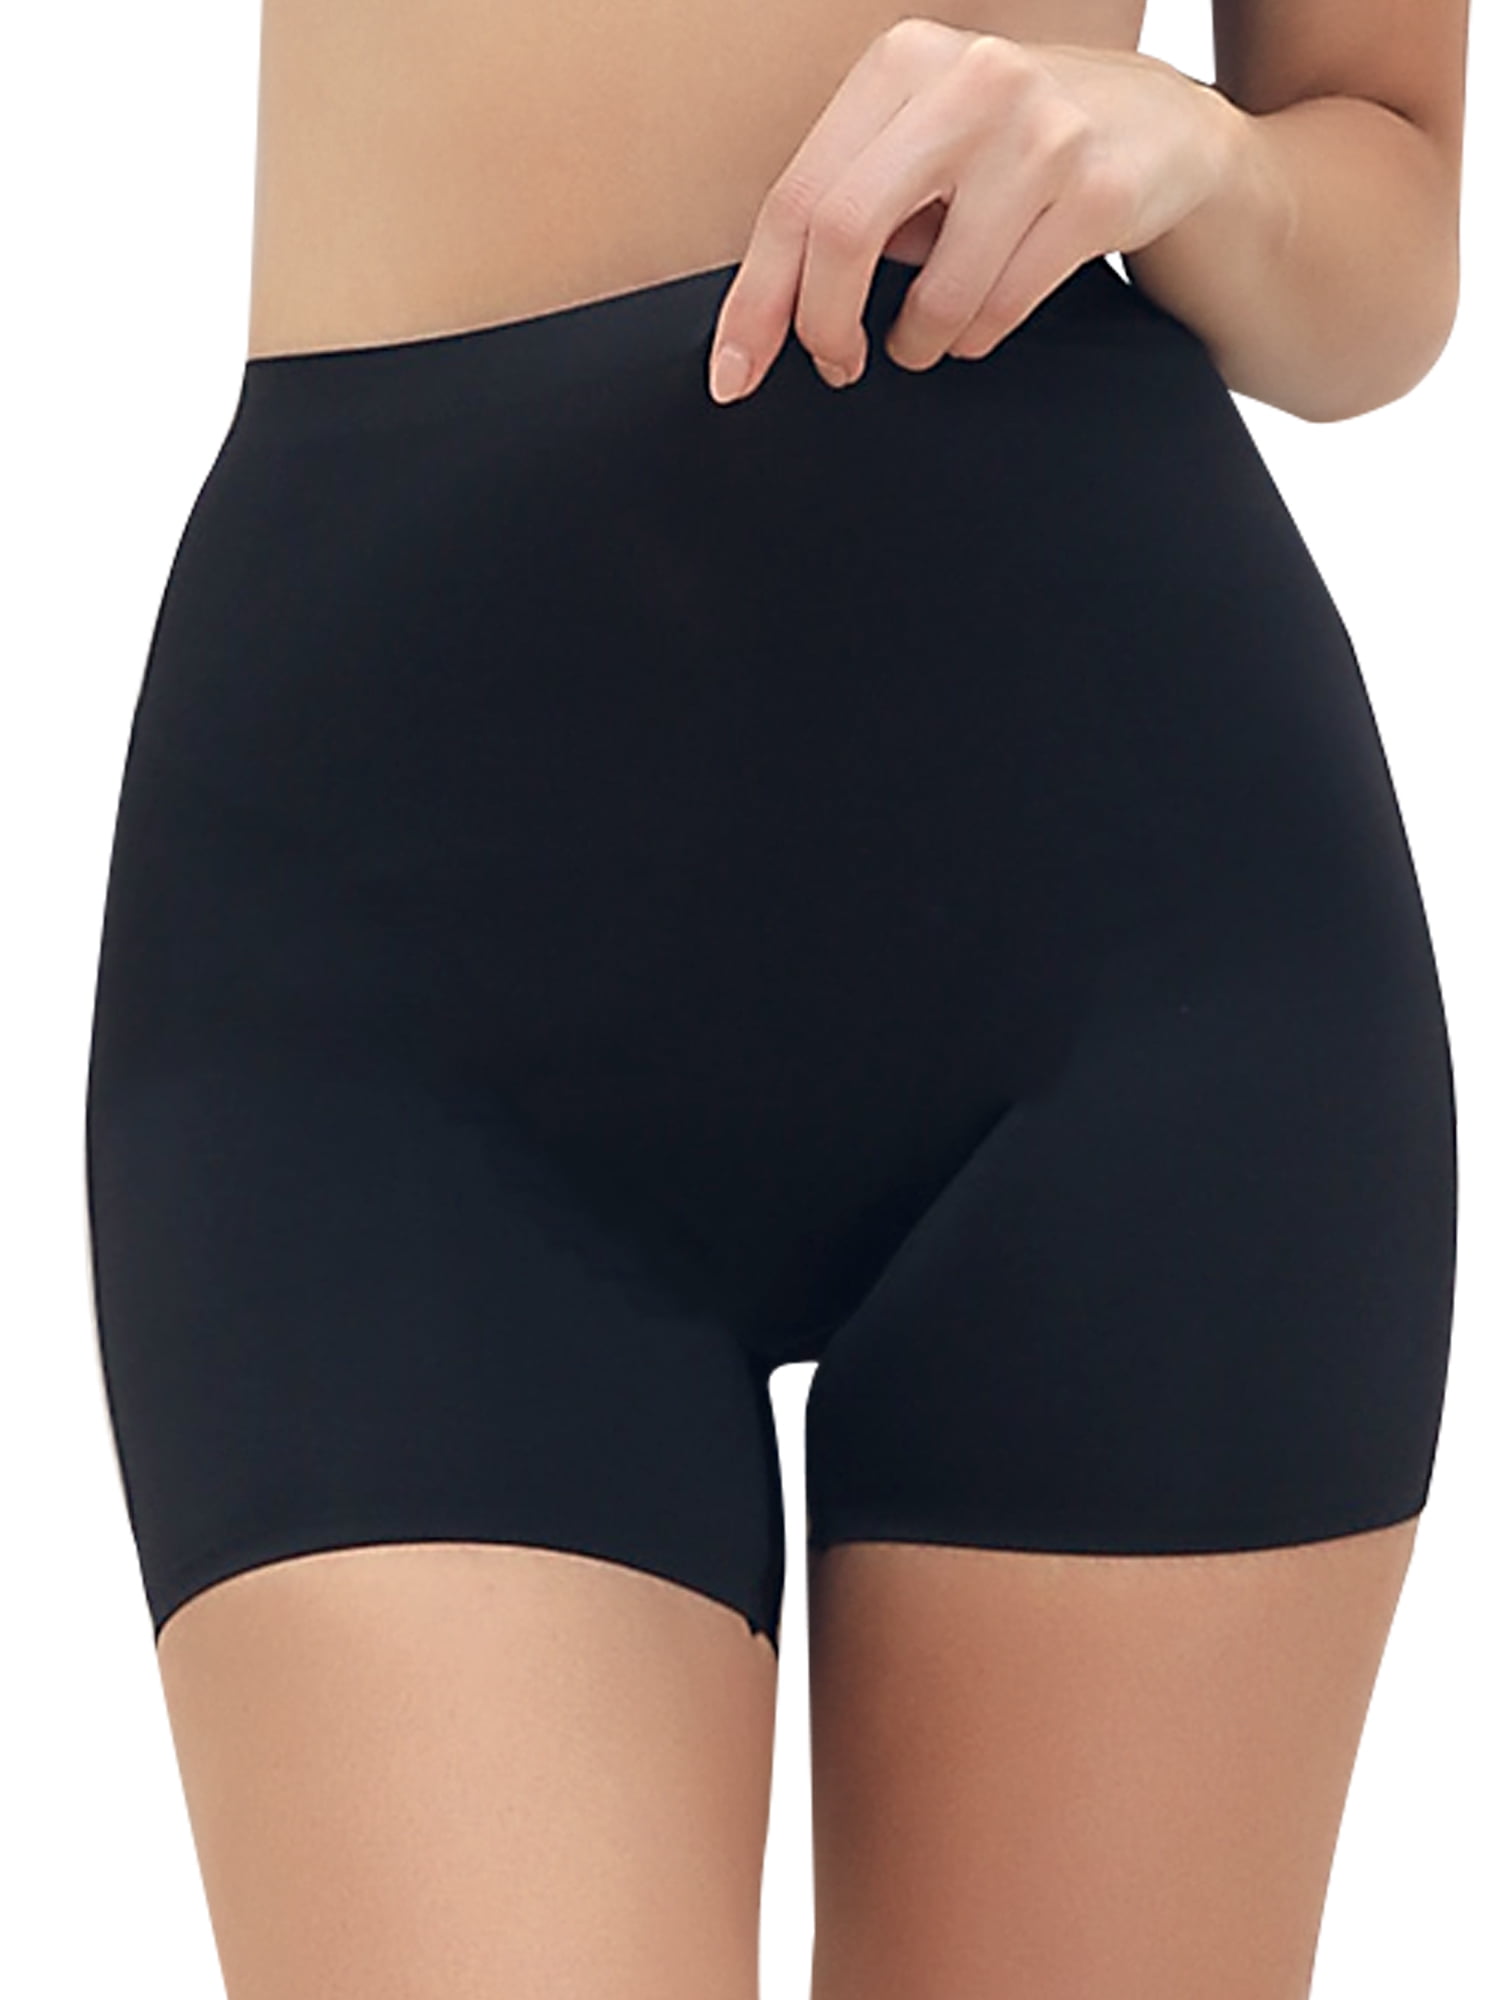 Thigh Chaffing Protection Slip Shorts in Cotton Spandex In Touch Womens Yoga Shorts